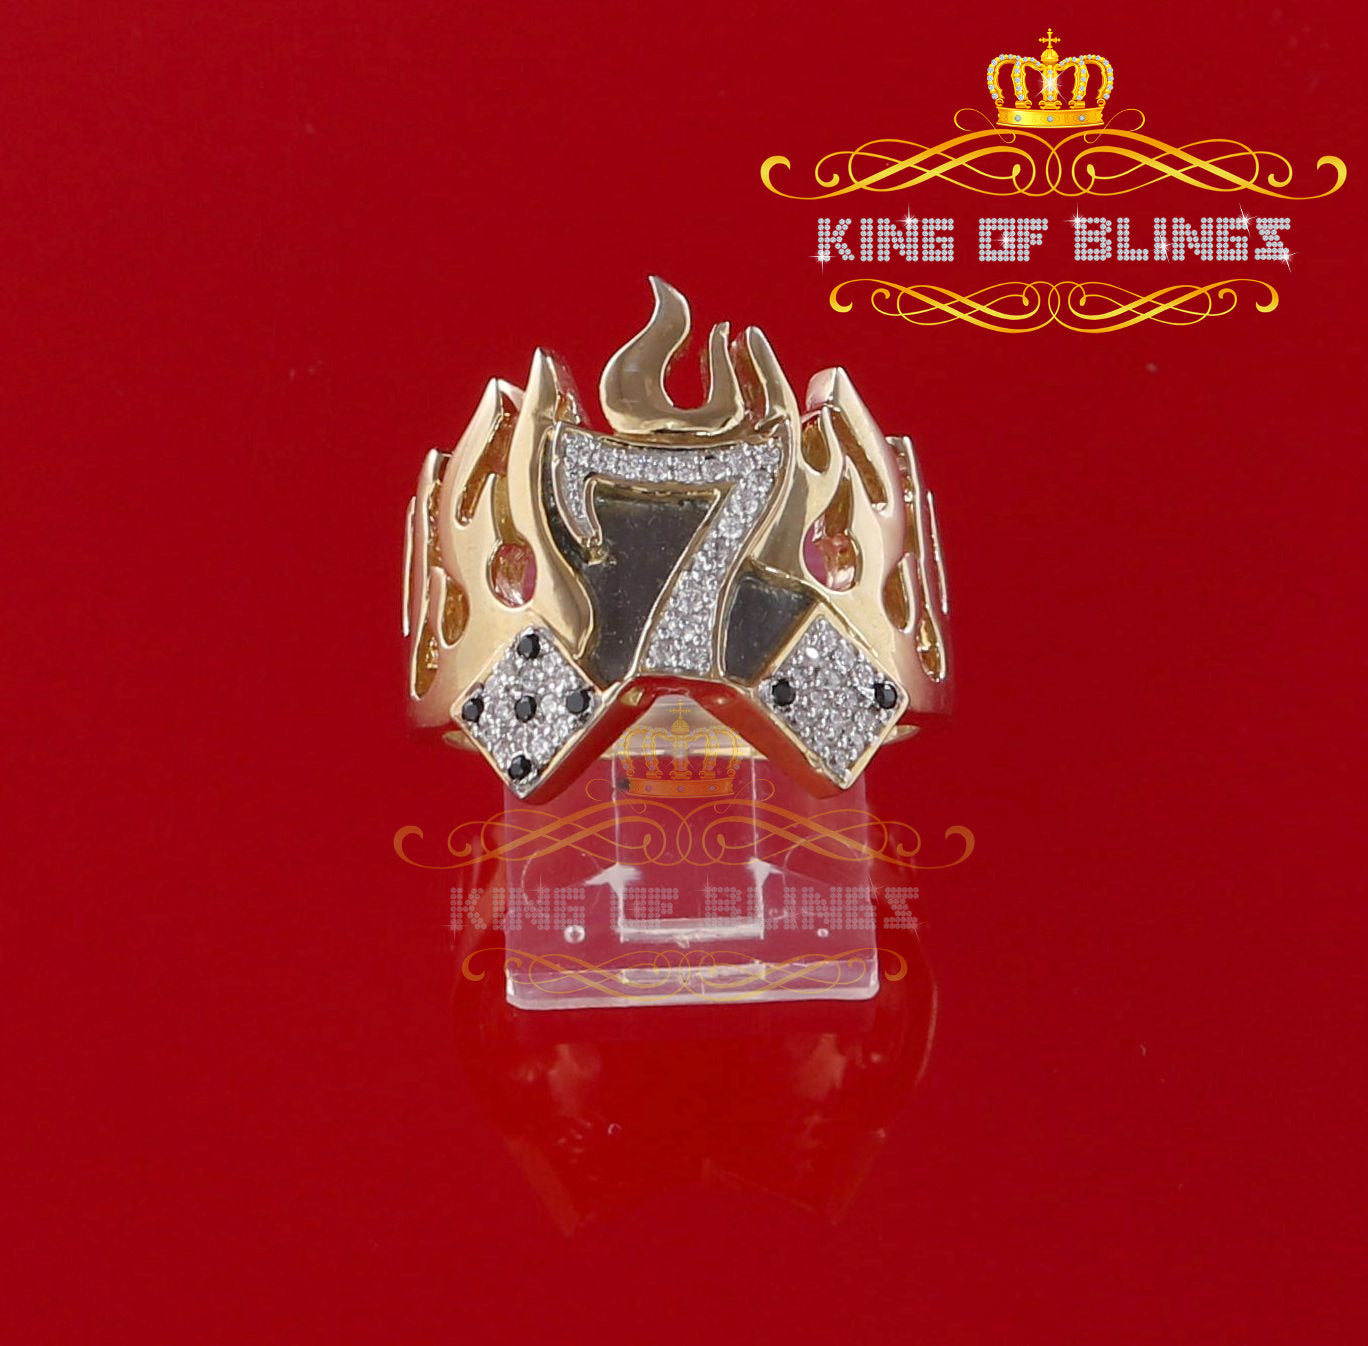 King Of Bling's Yellow 0.40ct Cubic Zirconia Silver Crown7 Men's Adjustable Ring From SZ 9 to 11 KING OF BLINGS